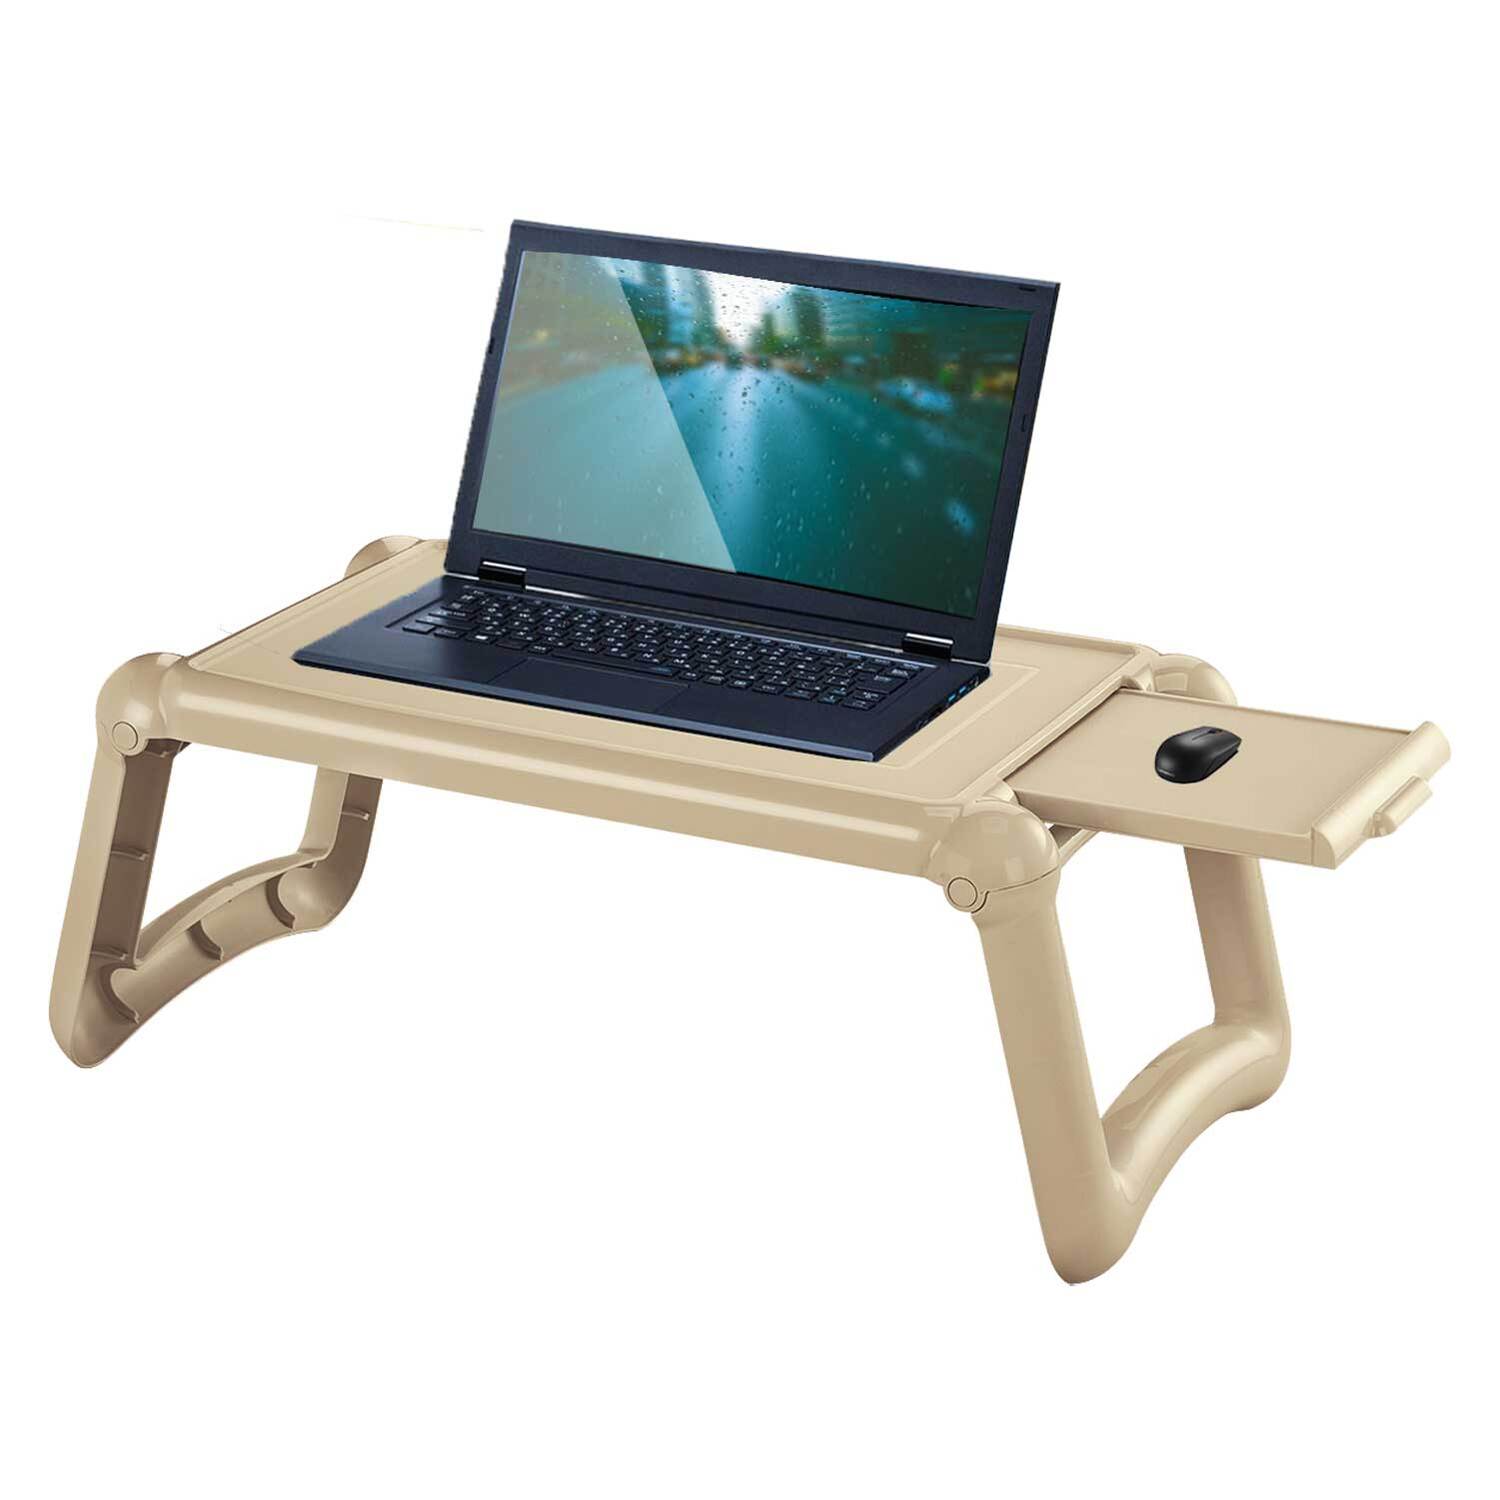 Multipurpose tray table with slide-out shelf